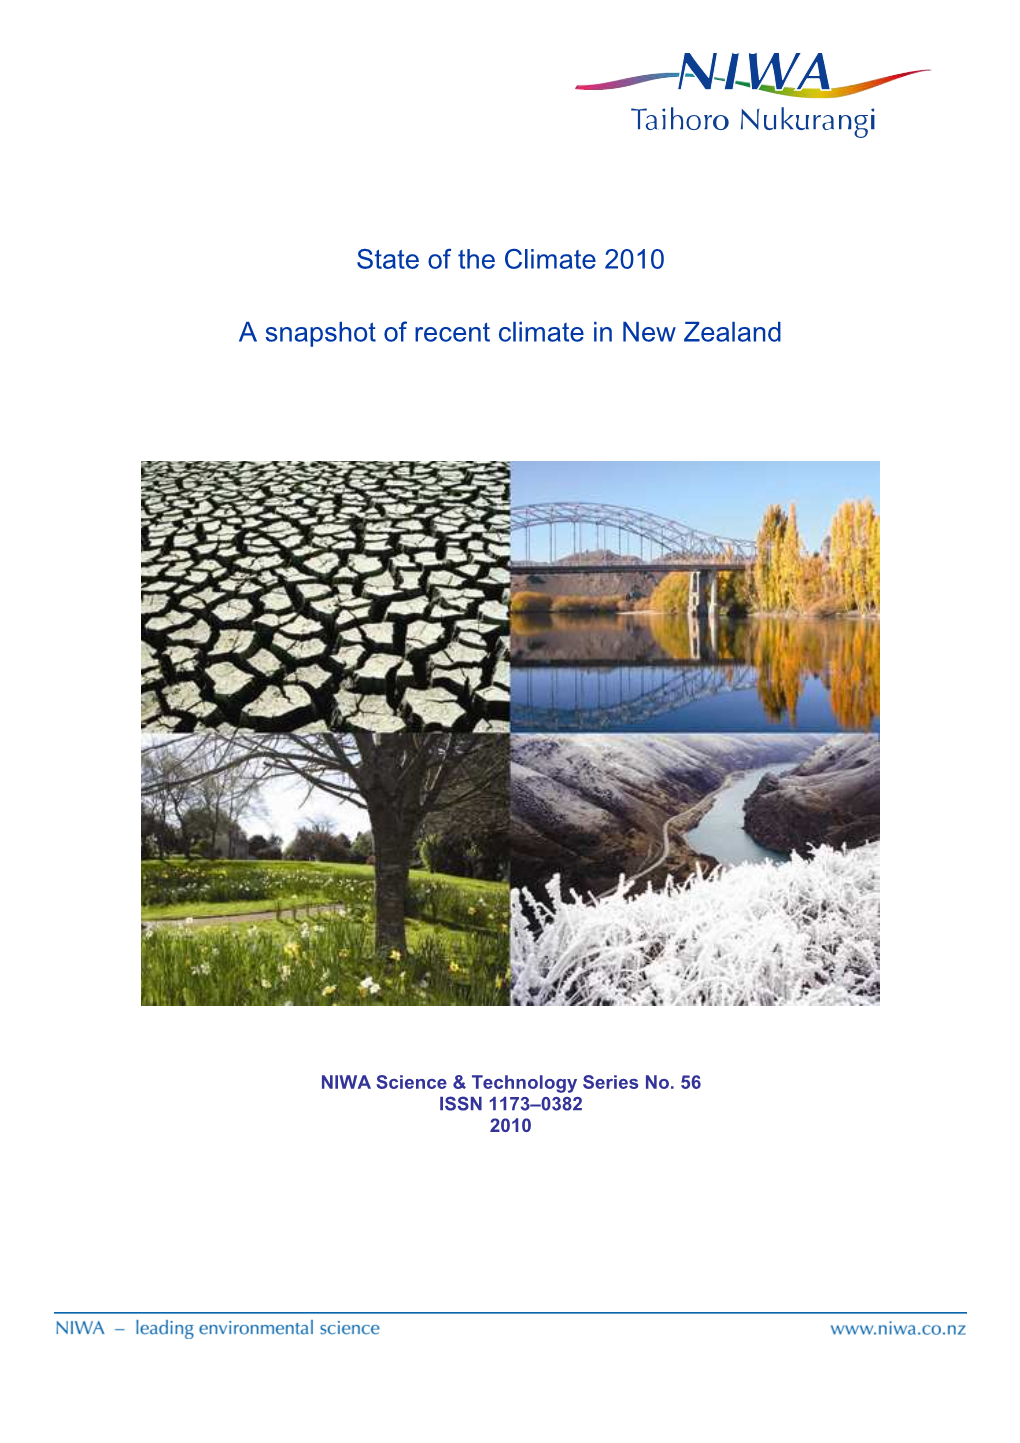 State of the Climate, June 30 2010 2